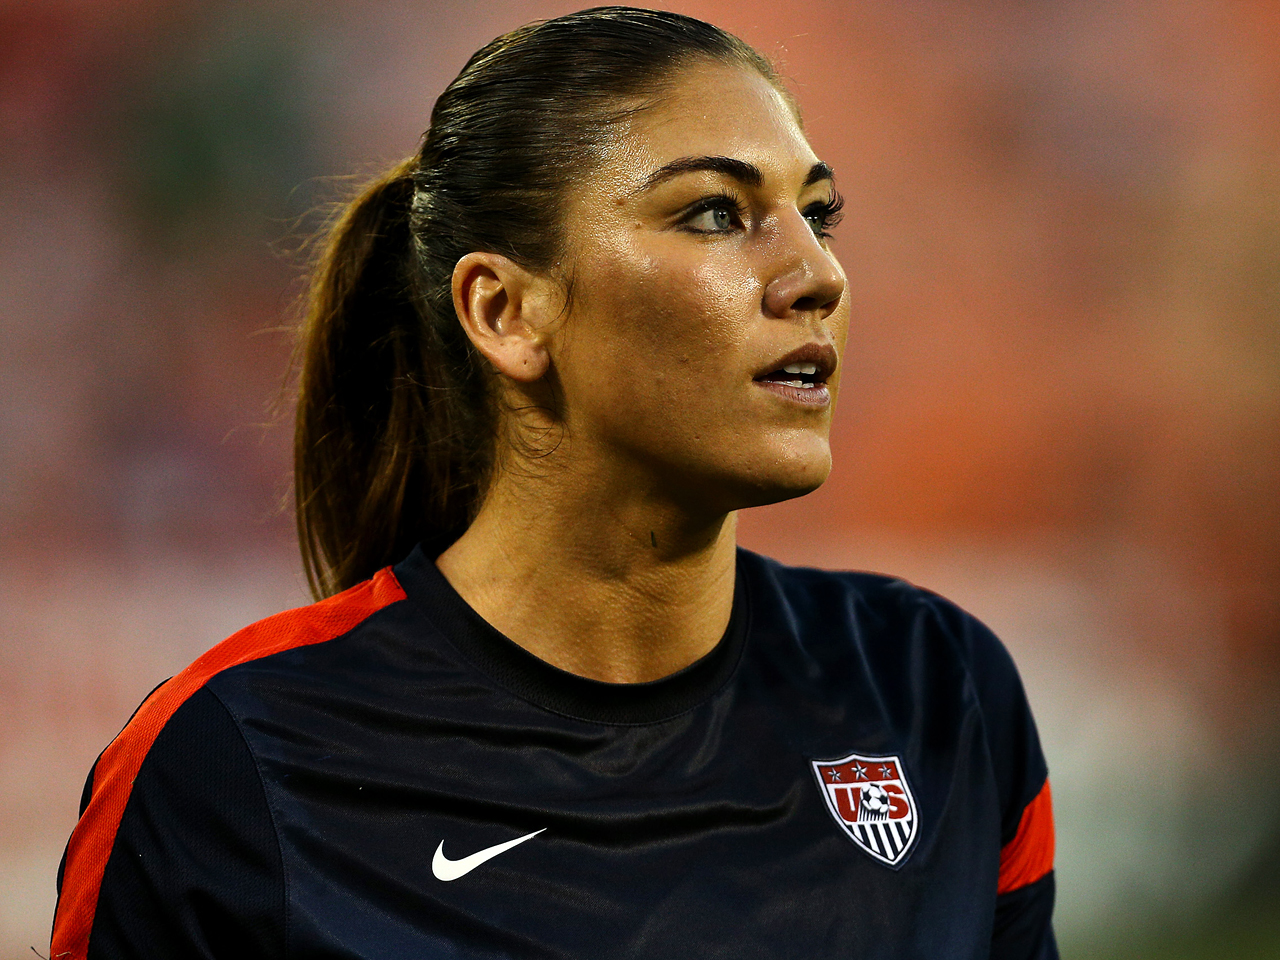 Hope solo is also one of the best known female athletes in the united state...